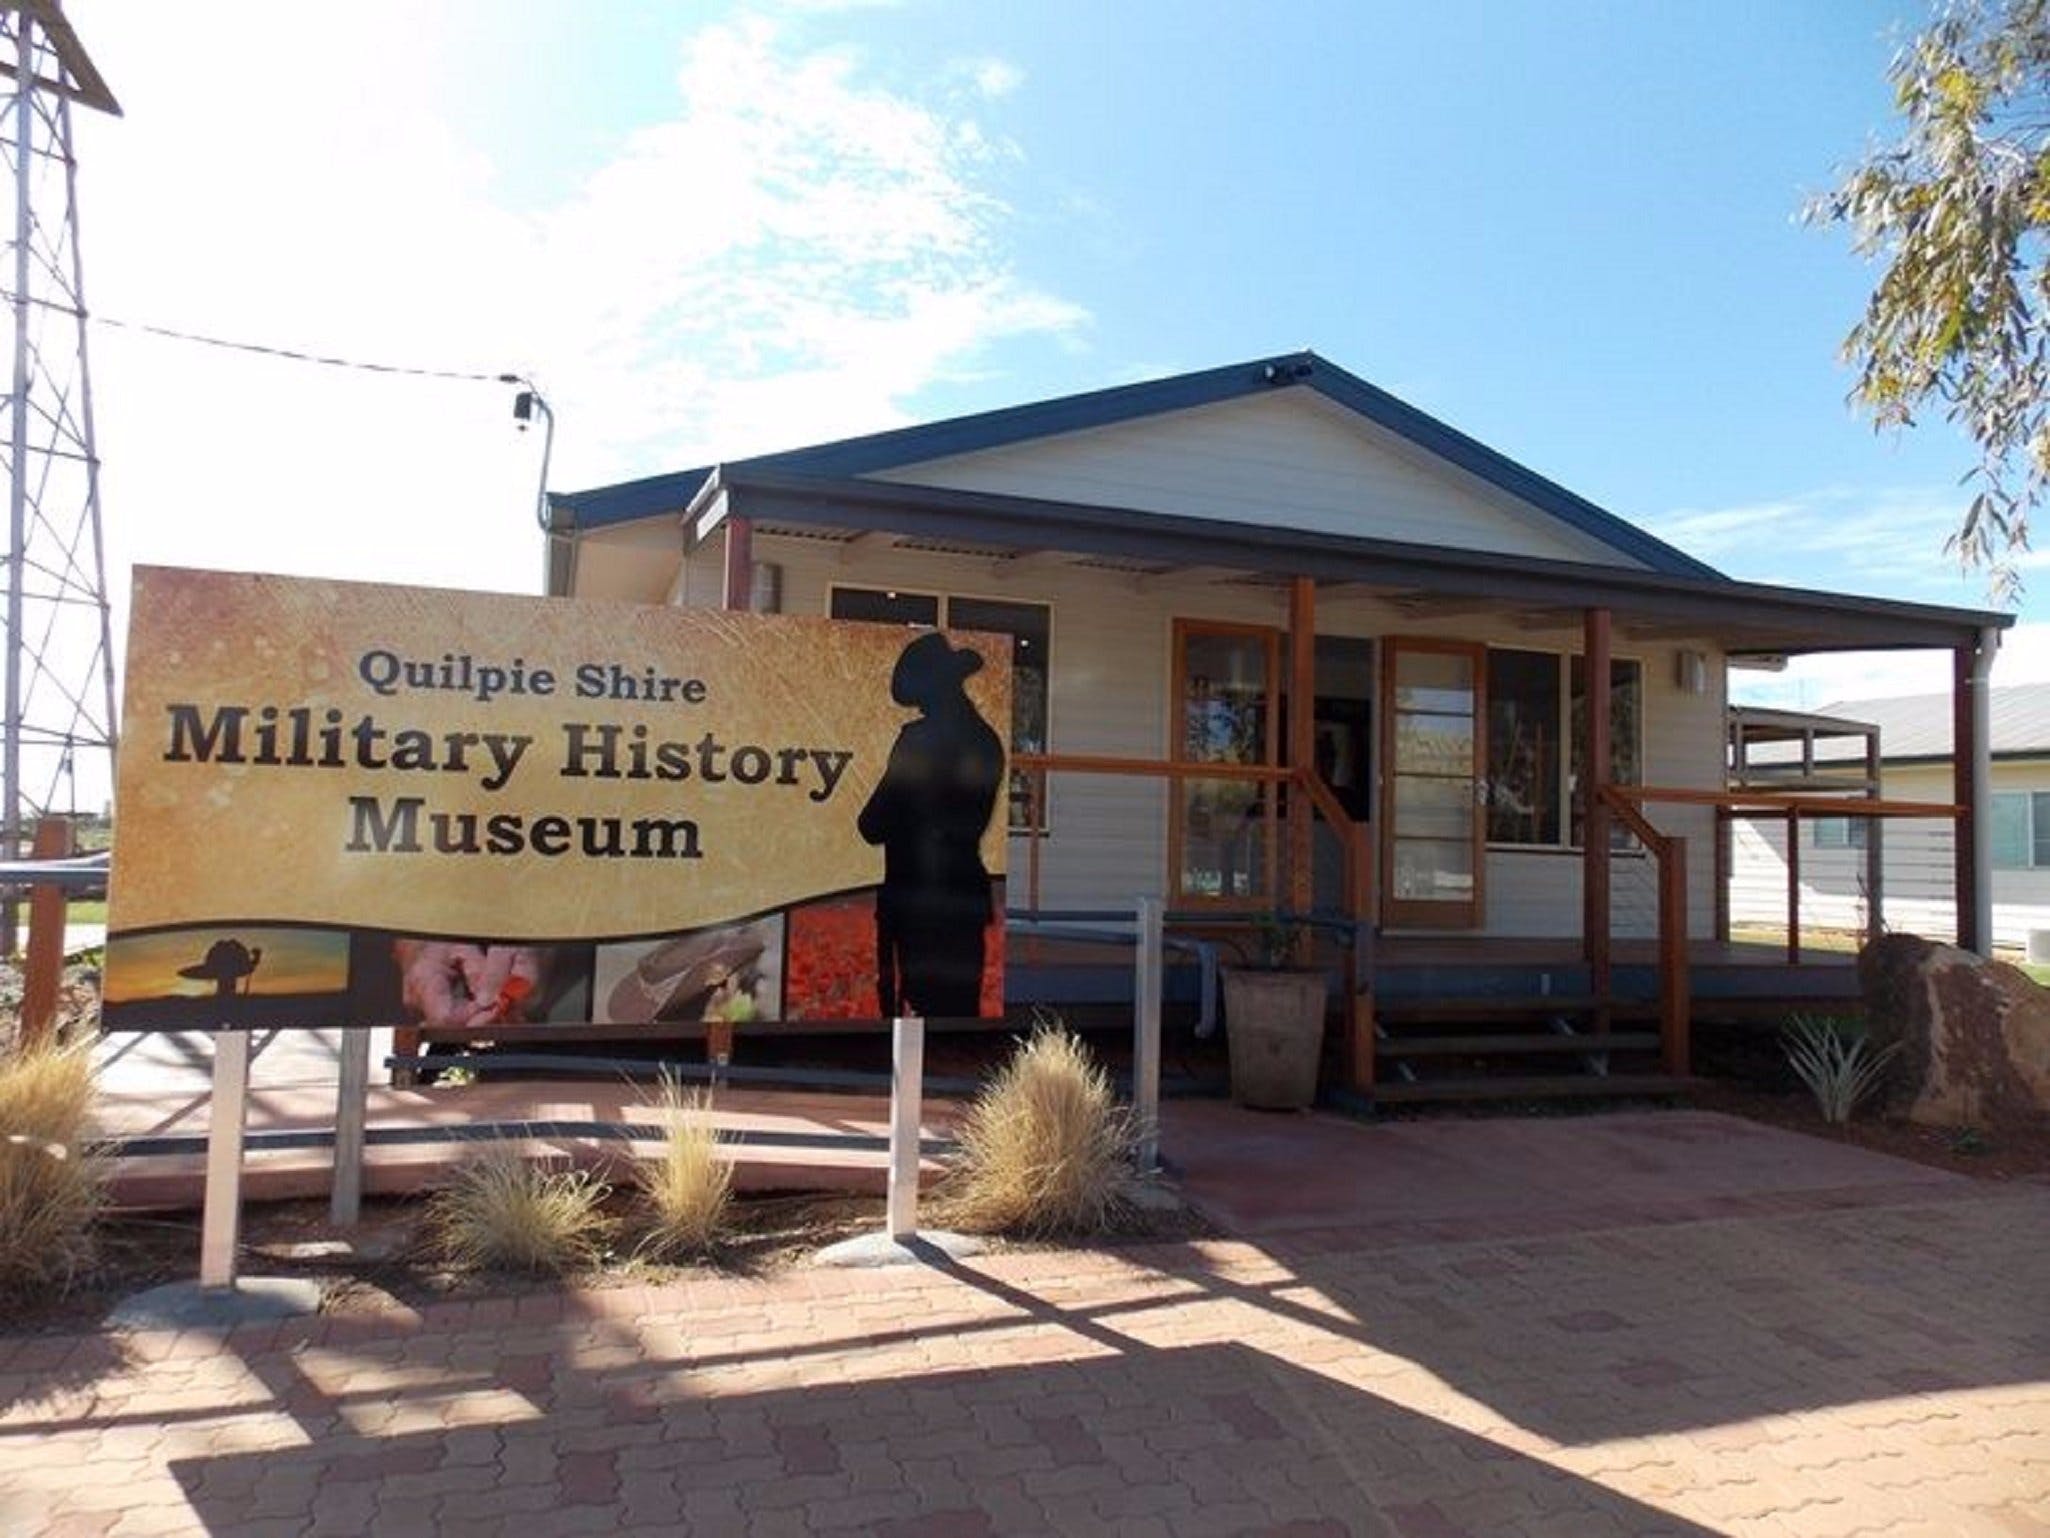 Quilpie Shire Military History Museum - Carnarvon Accommodation